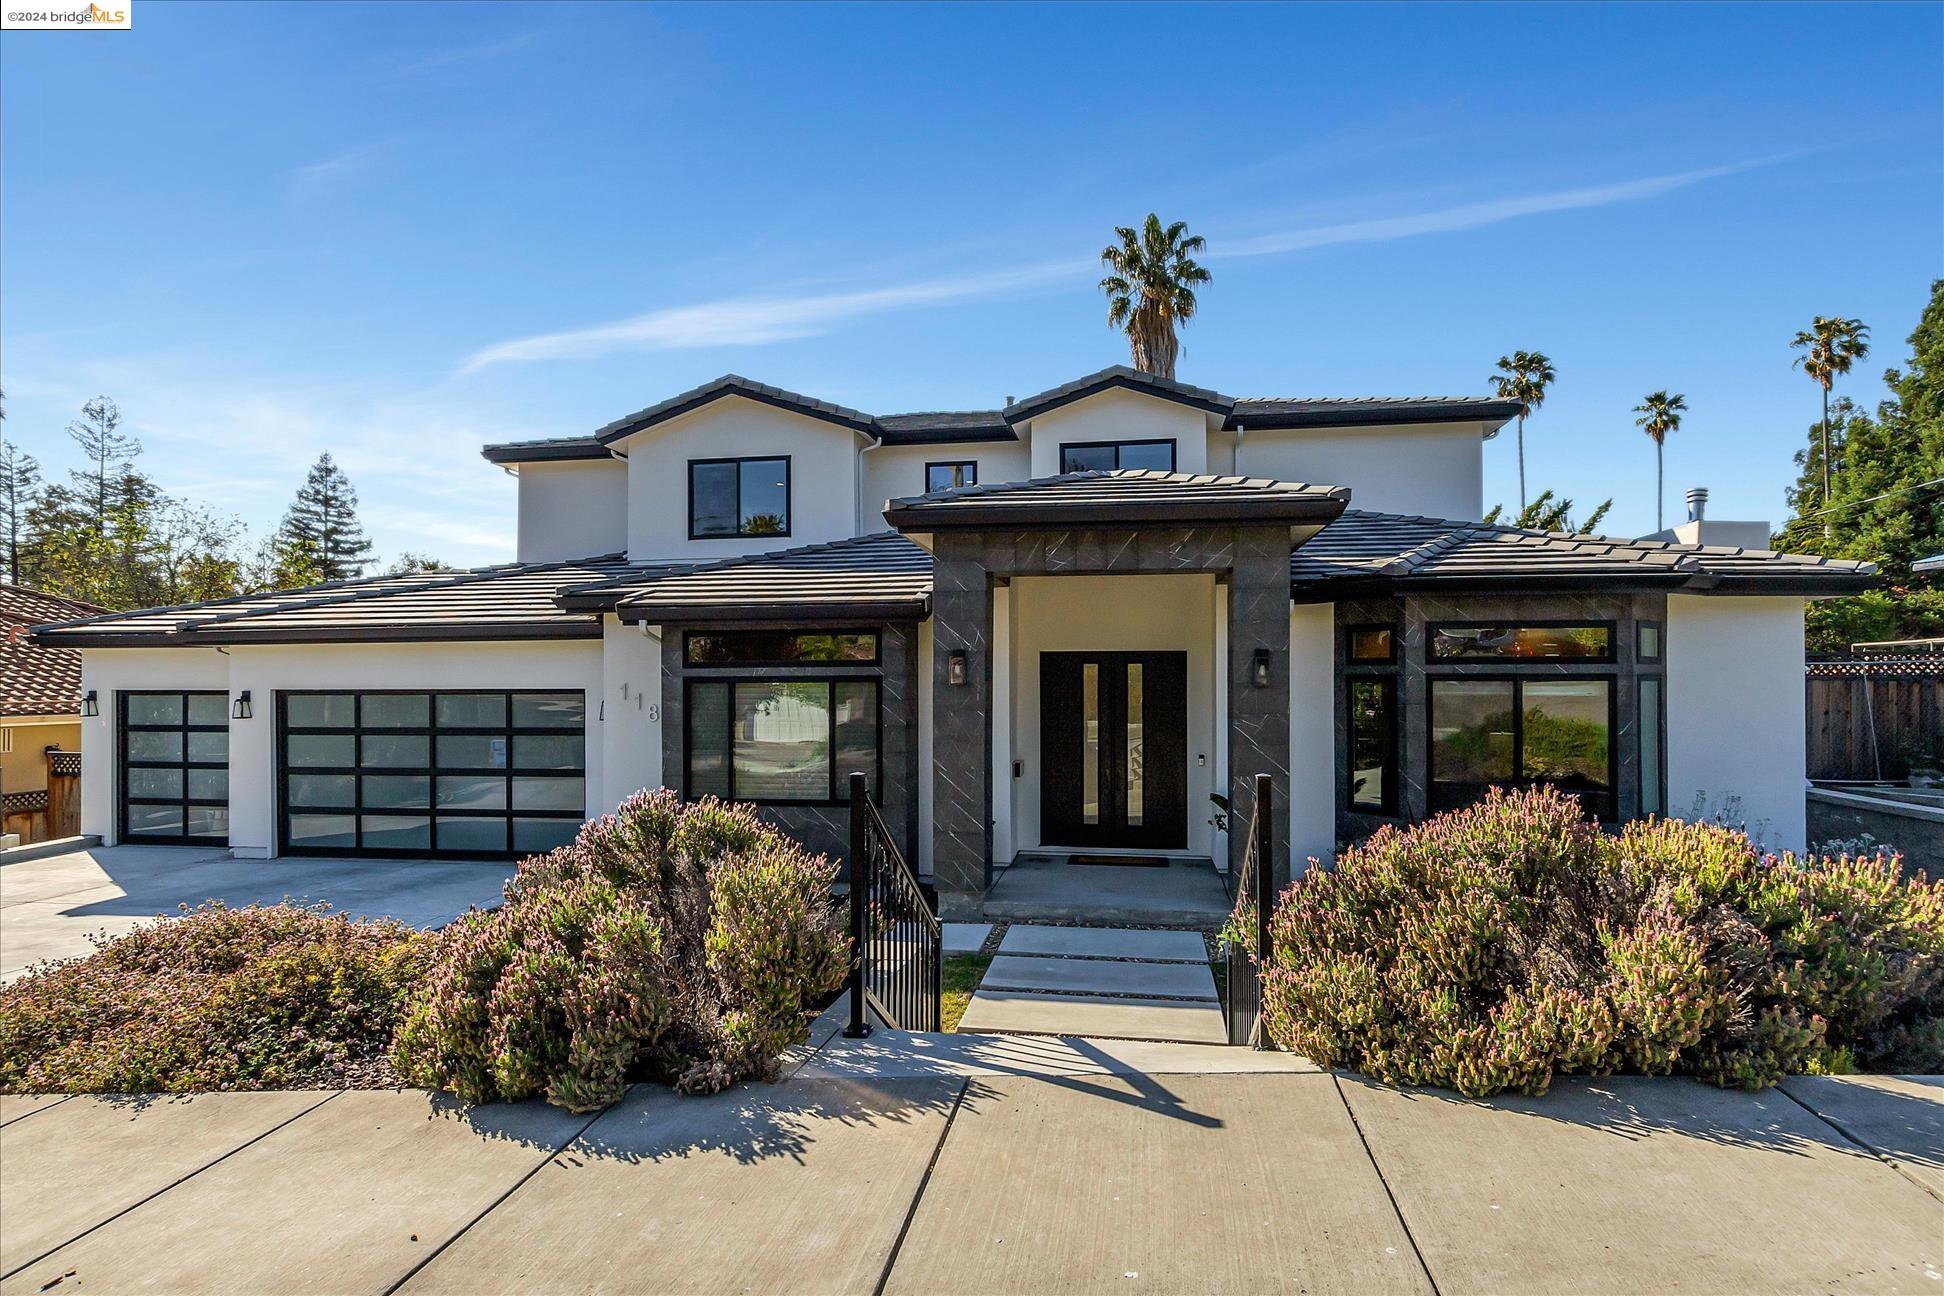 Luxury living + Like New 2021 built w/ top rated Mission Schools! This custom-built, smart-tech SFH offers 5bed/5baths w/impressive 4,144sqft living+ expansive lot 15,000sqft+ 2bed/2bath downstairs+ 3-car garage+ easy access to amenities, schools and transportation. The main level offers an expansive formal living room w/engineered-hardwood flooring, gas fireplace, bay window, large formal dining room, wet bar w/wine fridge, guest suite, bedroom/office space and built-in speaker system throughout home+ fully landscaped yard & Ring system. The EPIC gourmet kitchen boasts quartz countertops, breakfast nook, high-end cabinetry+ SS appliances w/6-burner Thermador gas stove, range, dishwasher & drawer-microwave. Upstairs includes luxurious master suite, sitting area and cavernous walk-in closet. The master bath features spa-like tub, dual sinks, spacious shower w/linear drain. Minutes from 680/880, Mission Peak Preserve, shopping, parks & restaurants. This home offers opulence at its finest combined with a seamless blend of comfort and sophistication